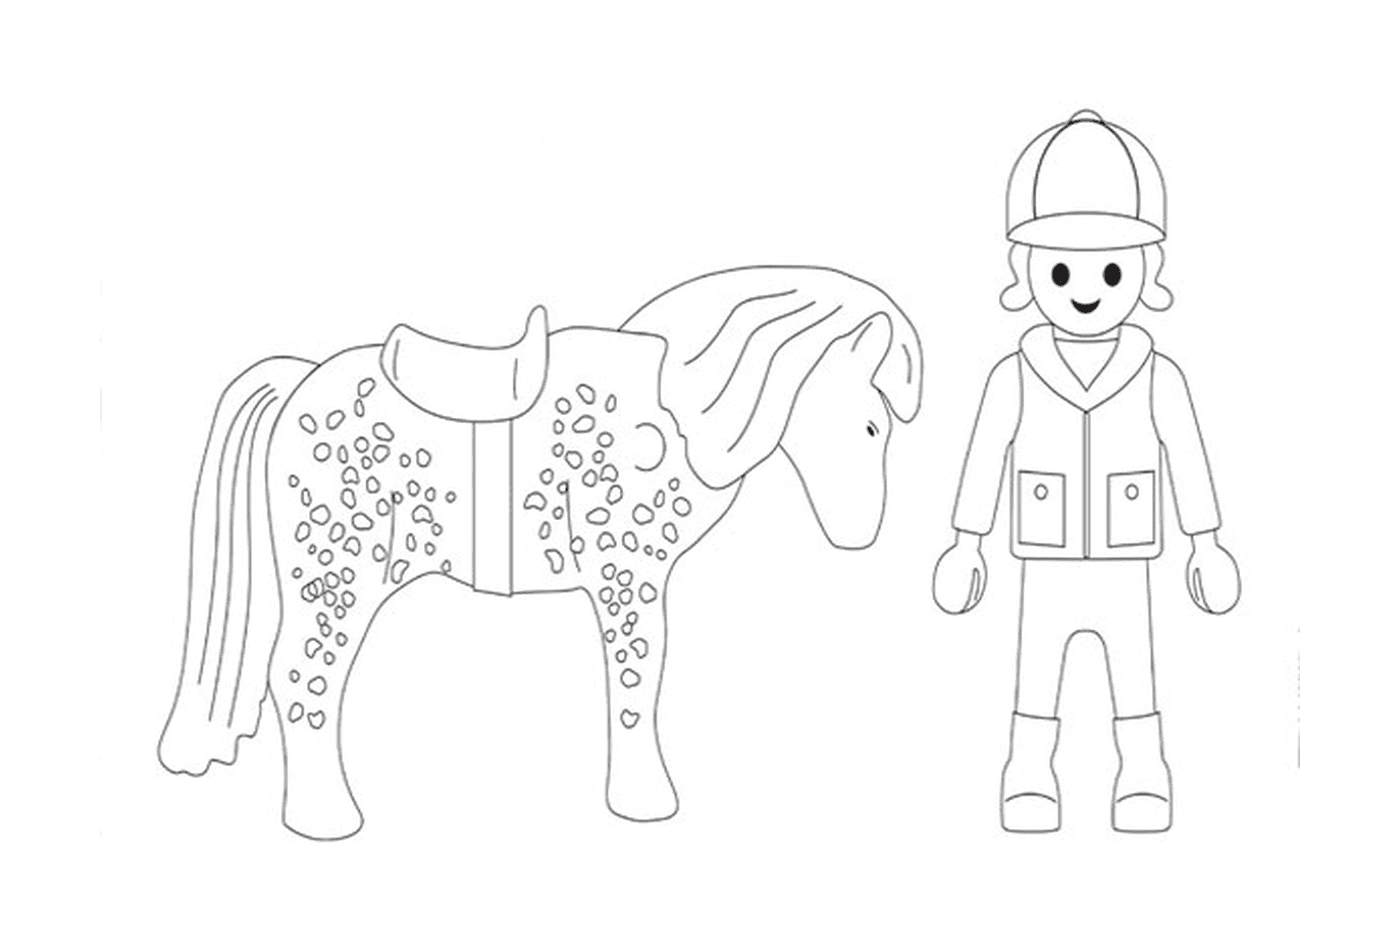 Playmobil horse - Image of a person and a horse